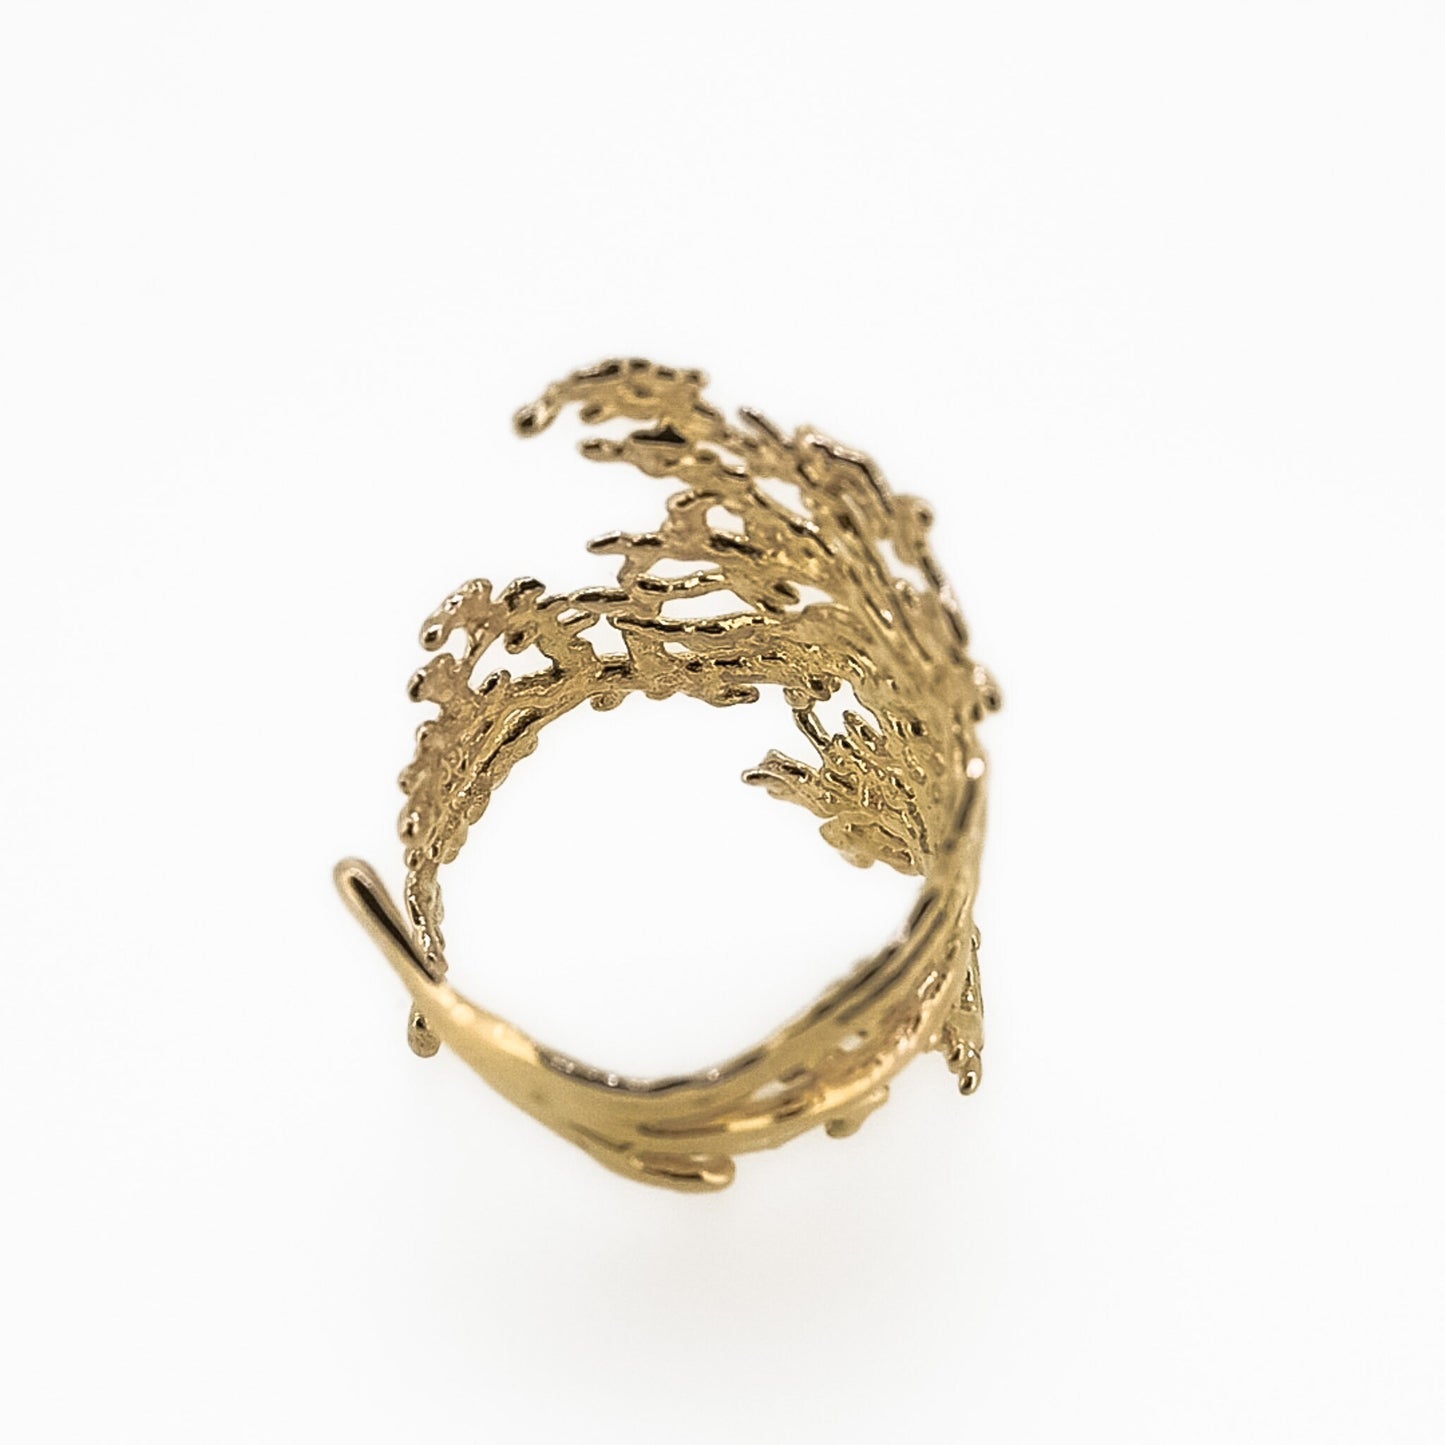 Coral Ring in Vermeil, Solid Silver, or 14k Gold Plate